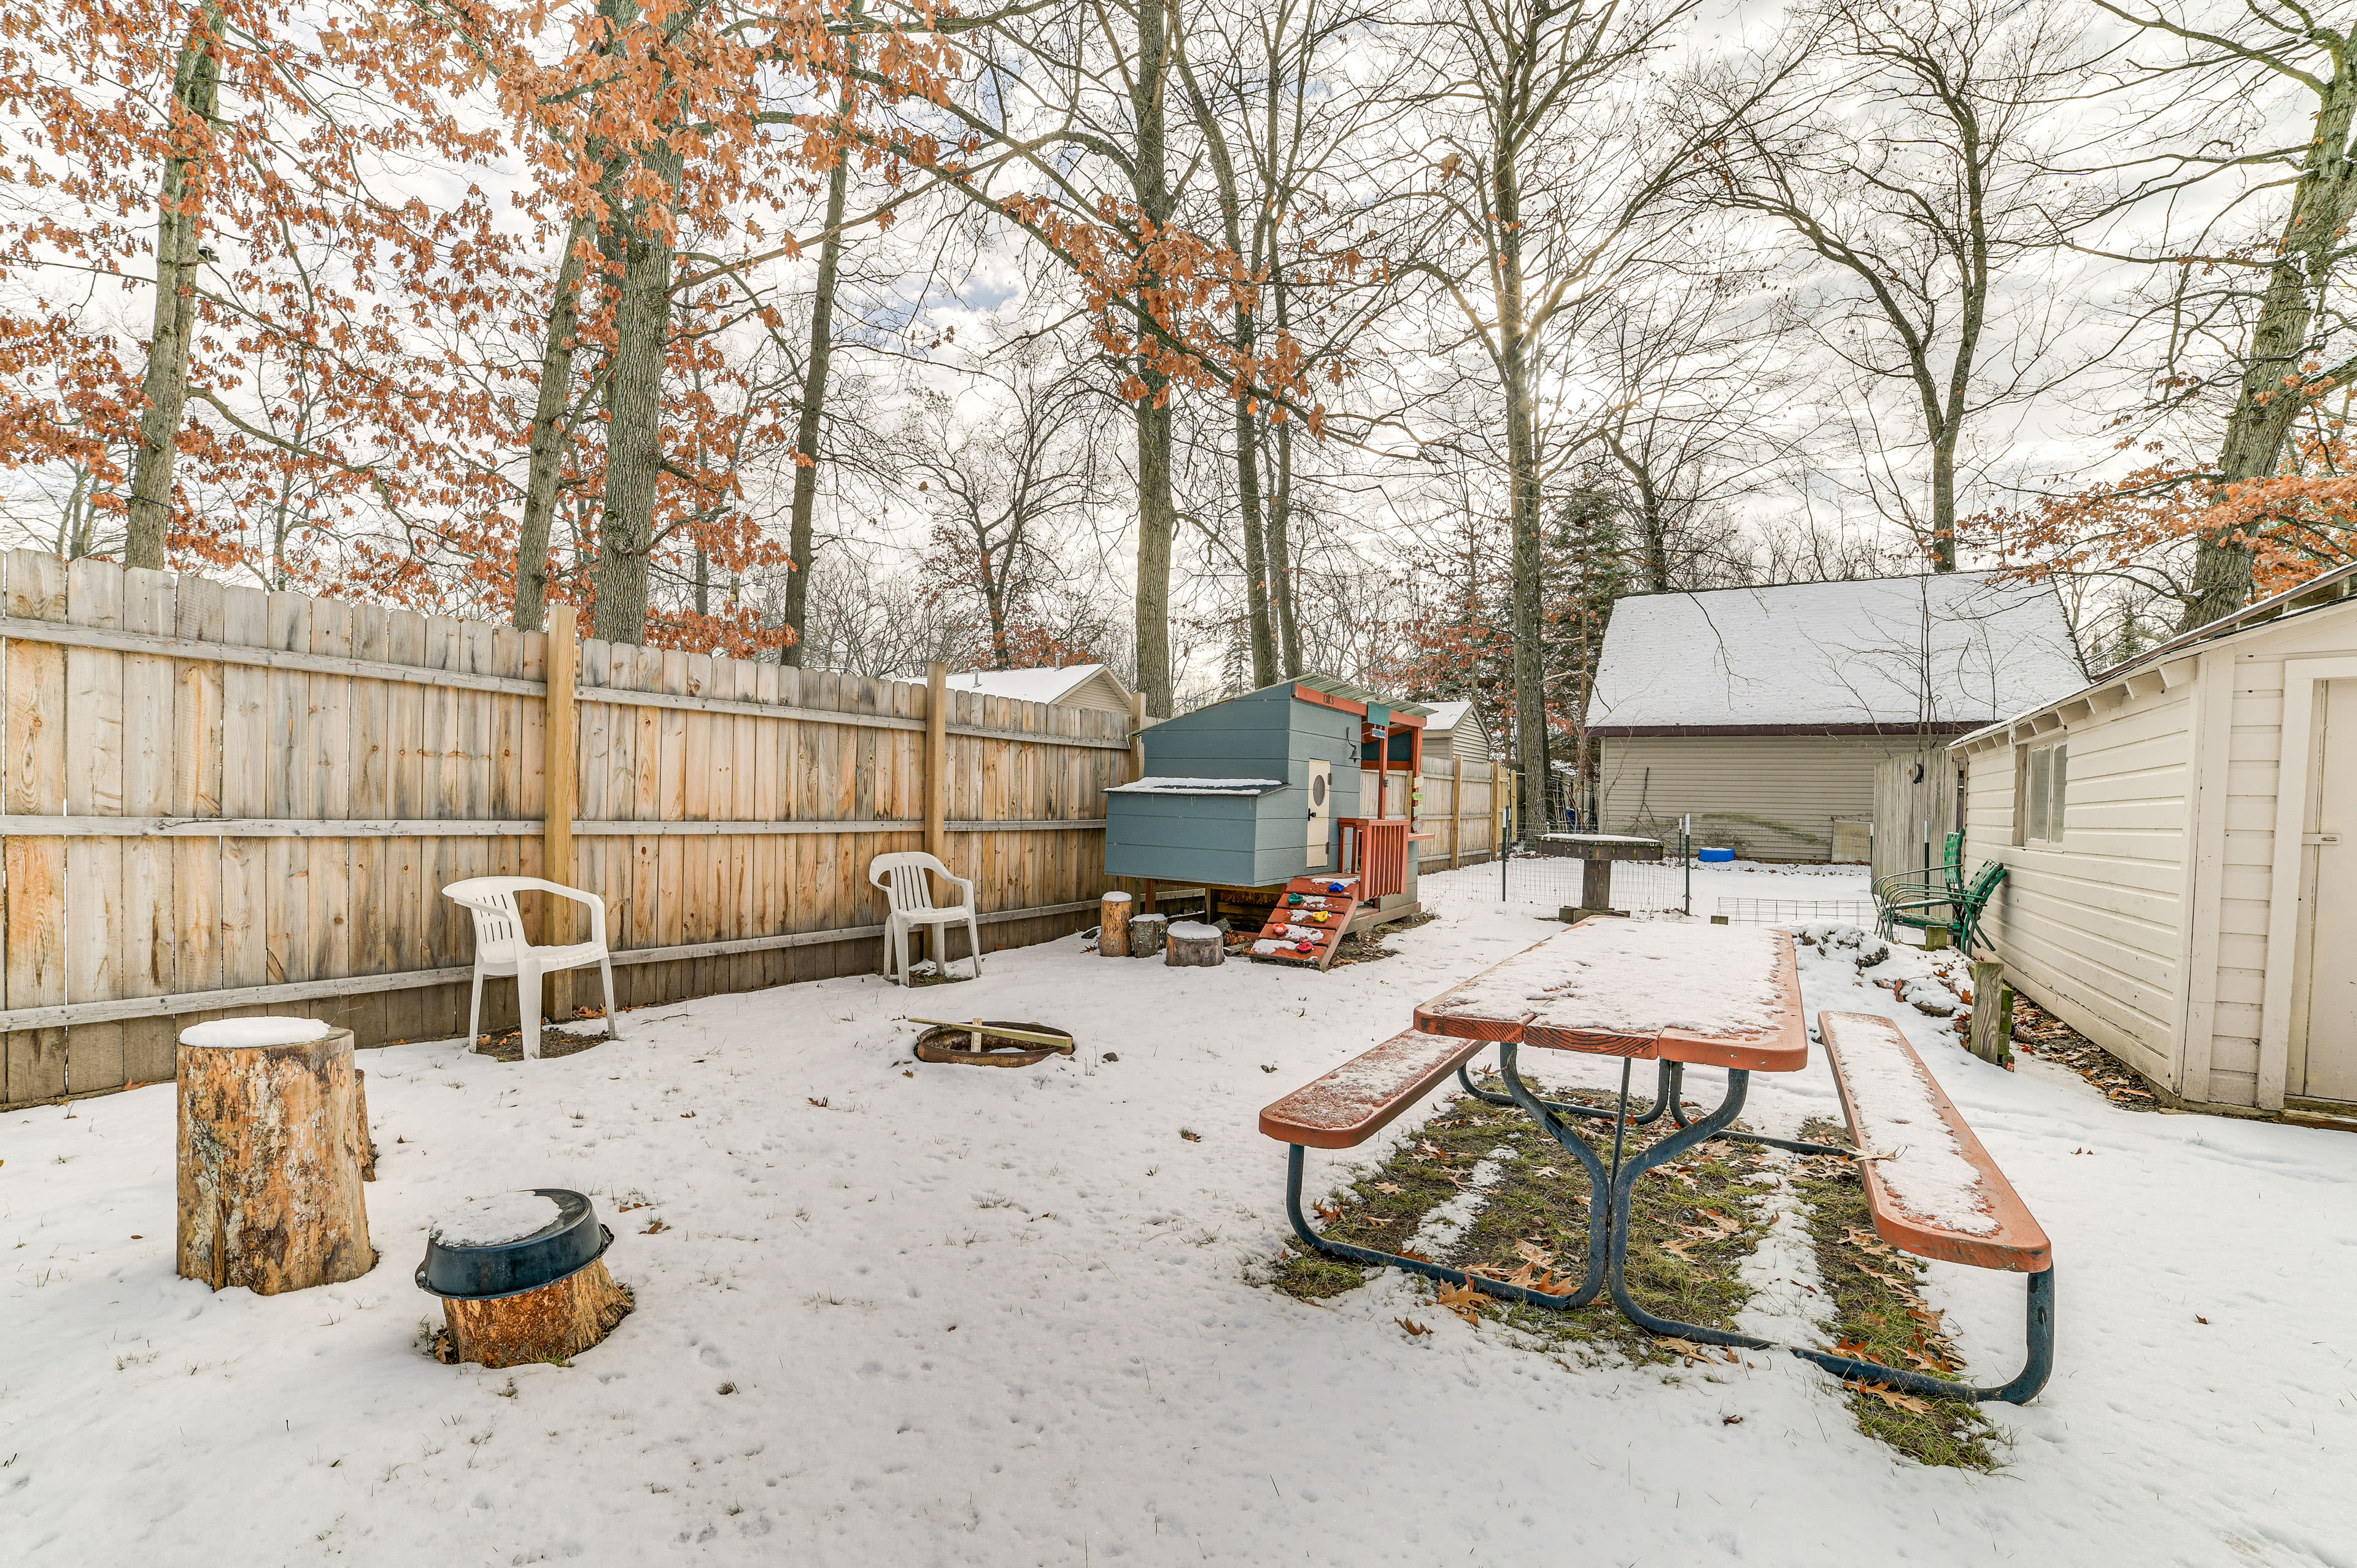 Fenced Backyard | Children's Play Area | Fire Pit | Picnic Table